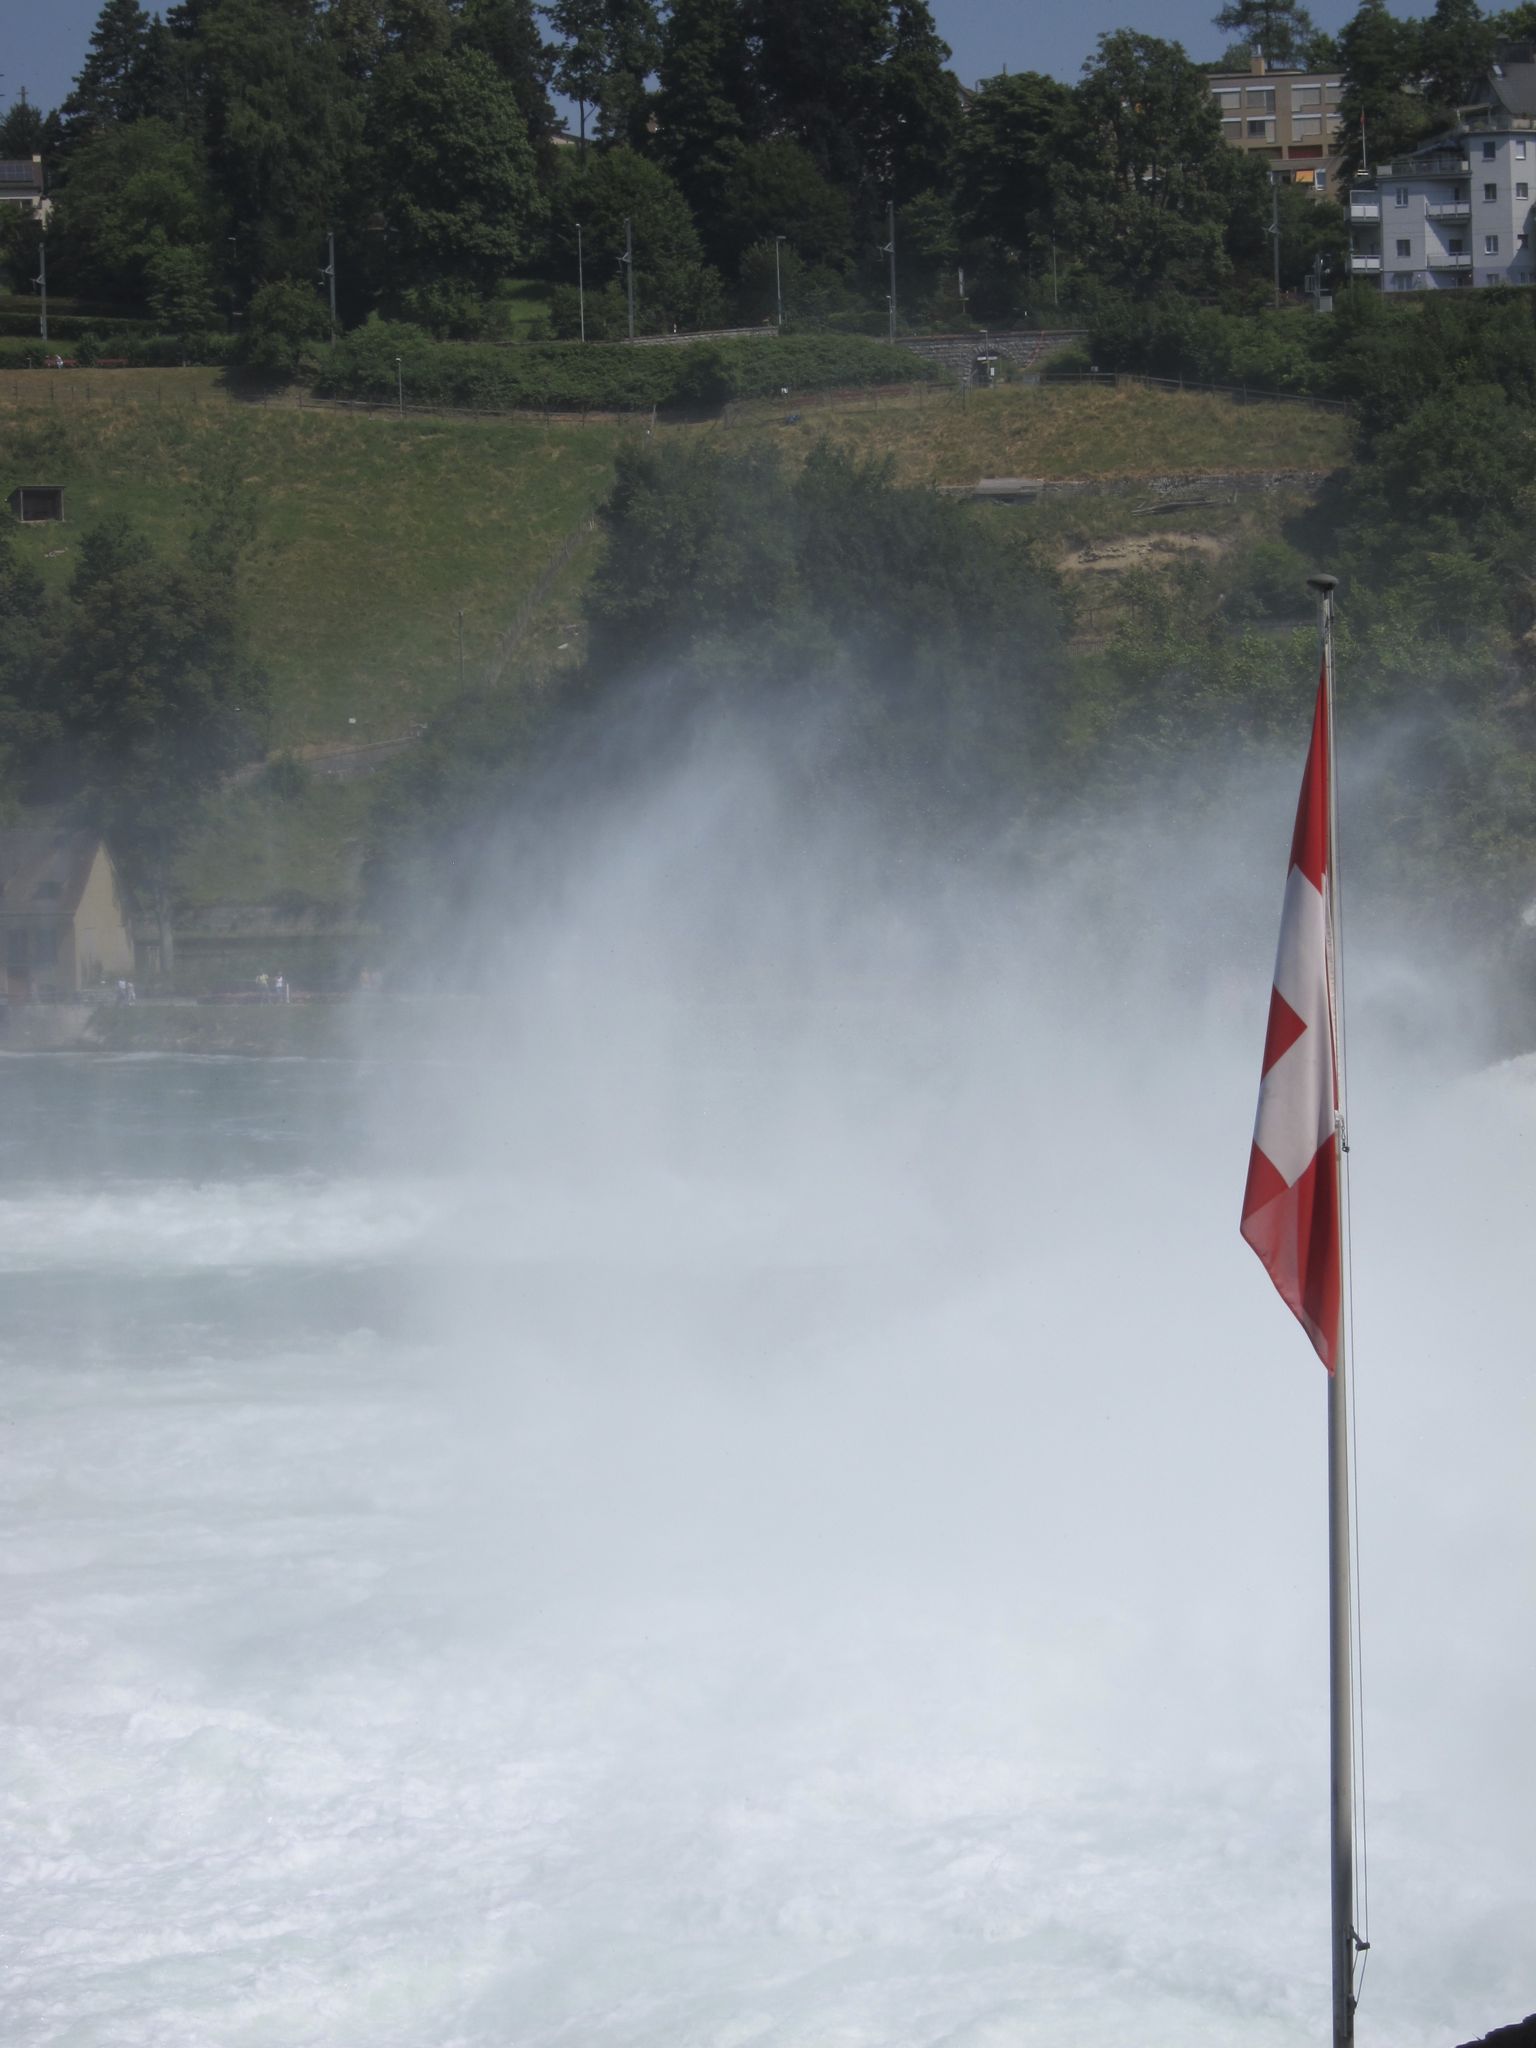 Photo 7 of 22 from the album Rheinfall.